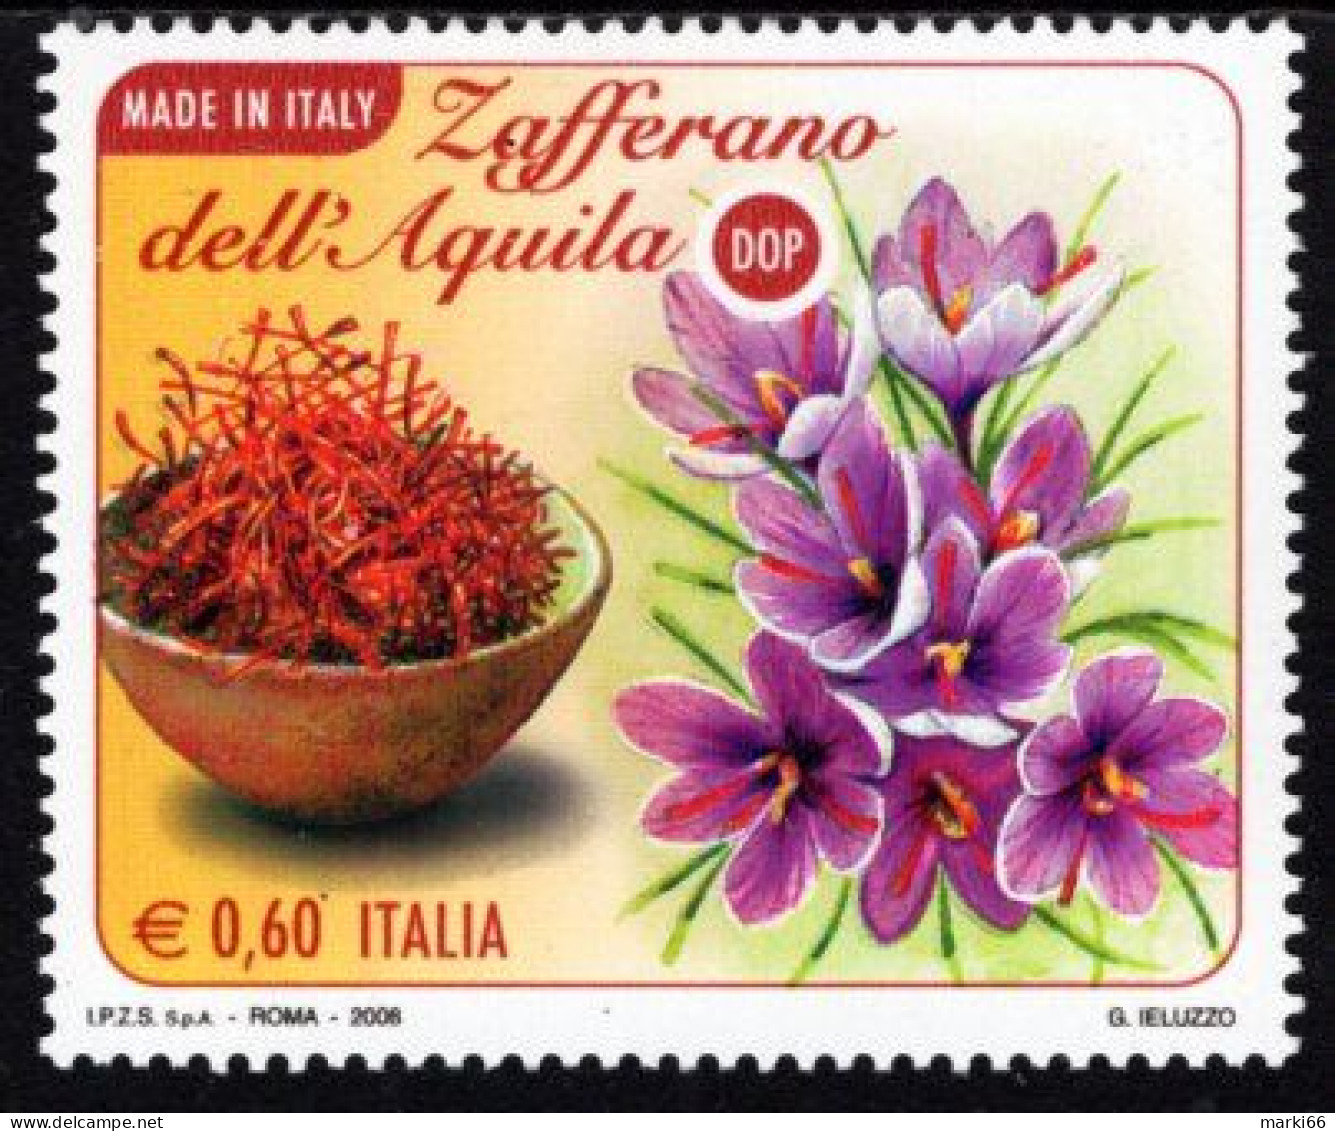 Italy - 2008 - Made In Italy - Saffron Of Aquila - Mint Stamp - 2001-10: Nieuw/plakker